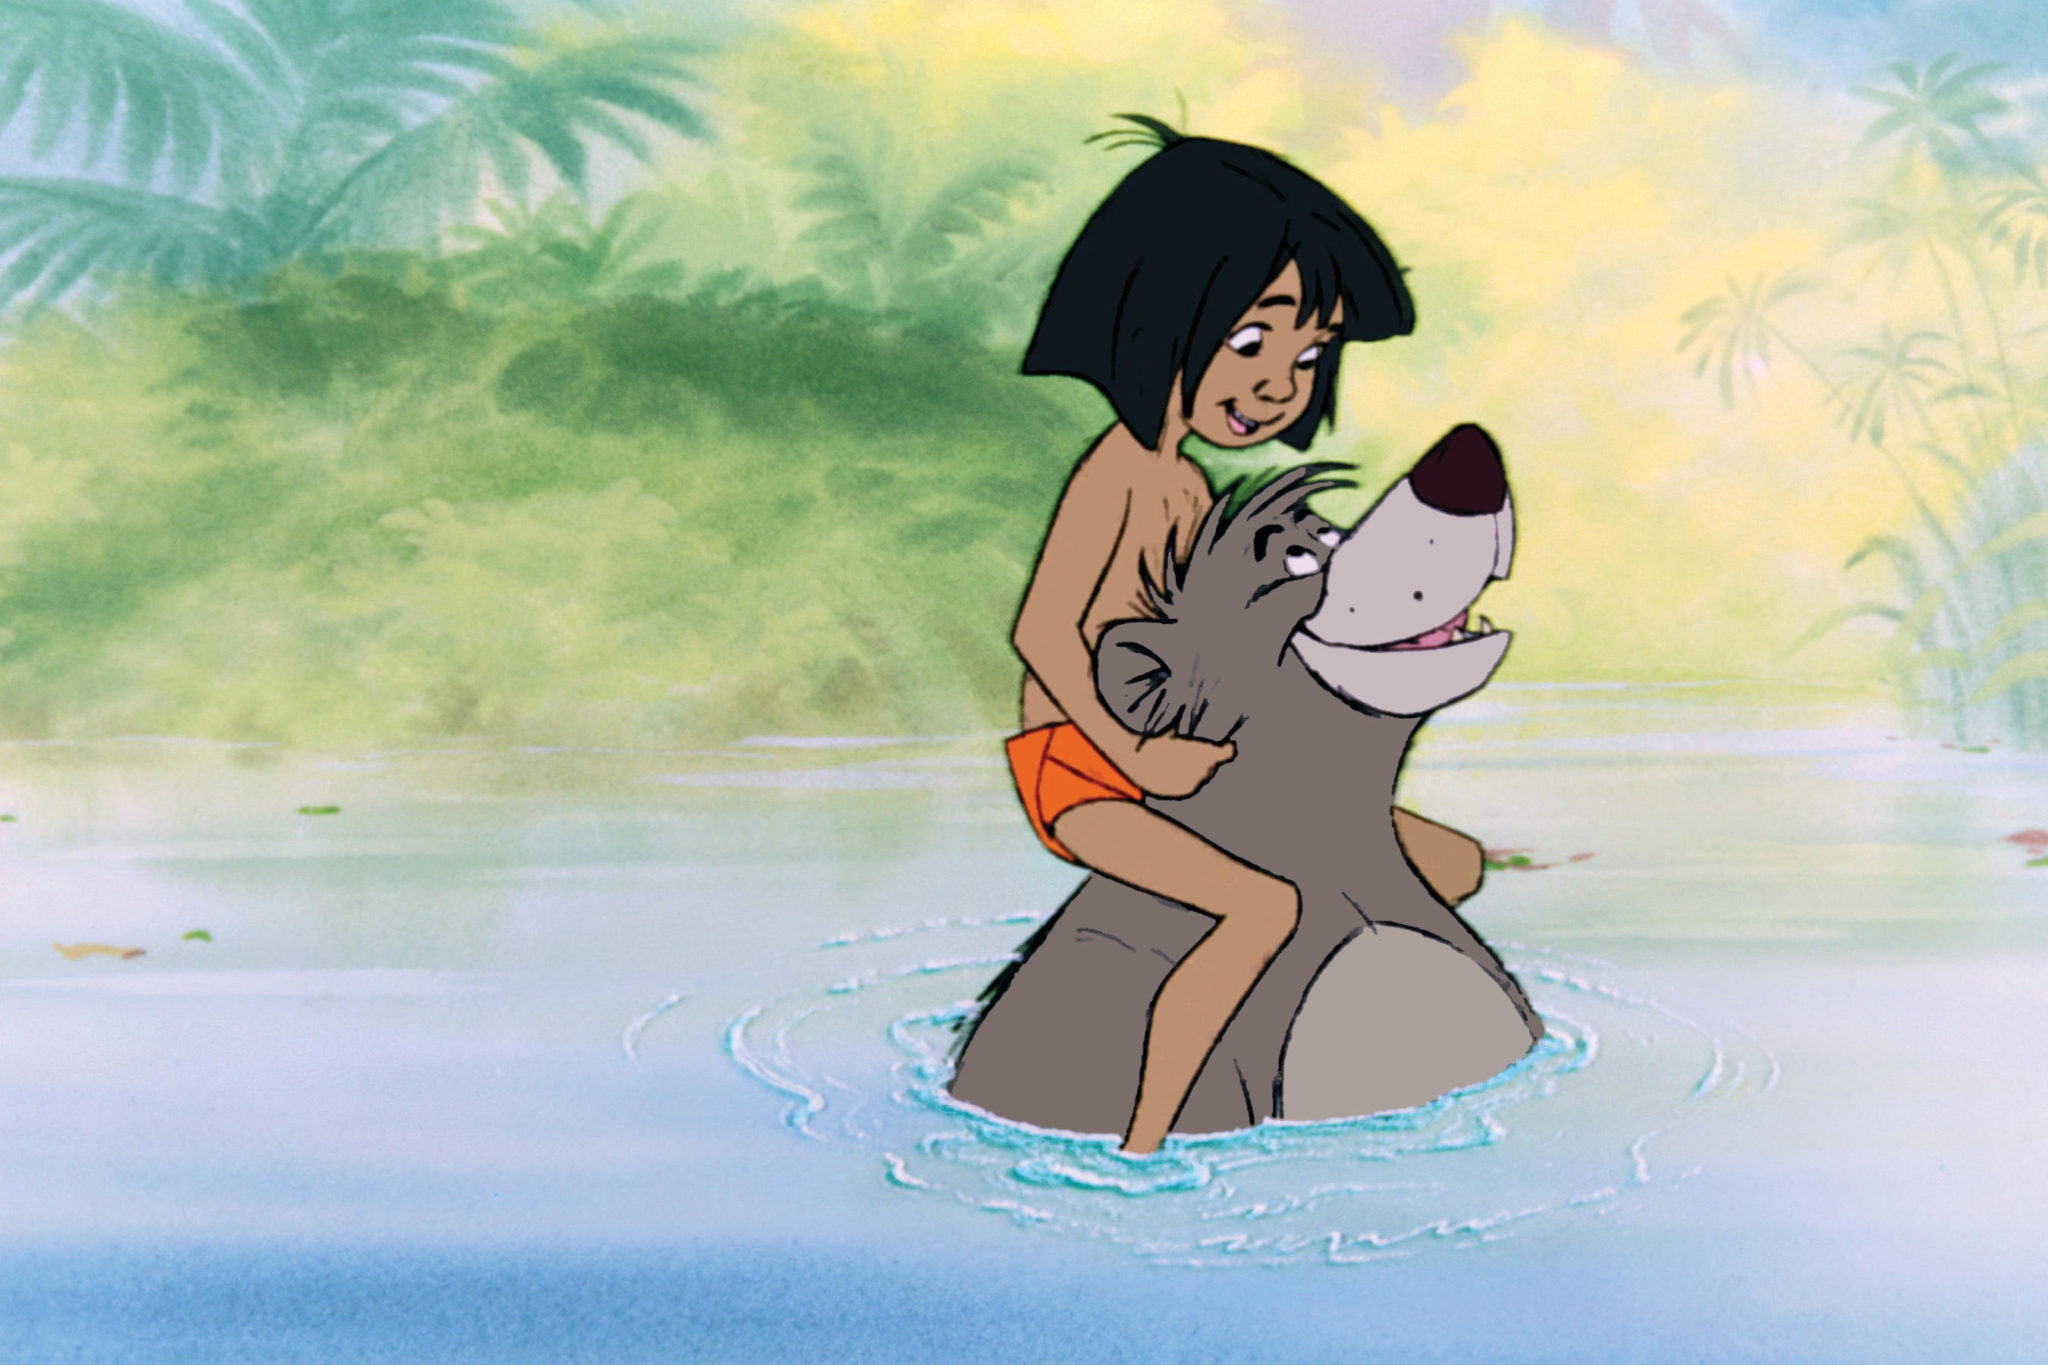 Bill Murray Joins 'Jungle Book' Live Action Cast As Baloo - Rotoscopers